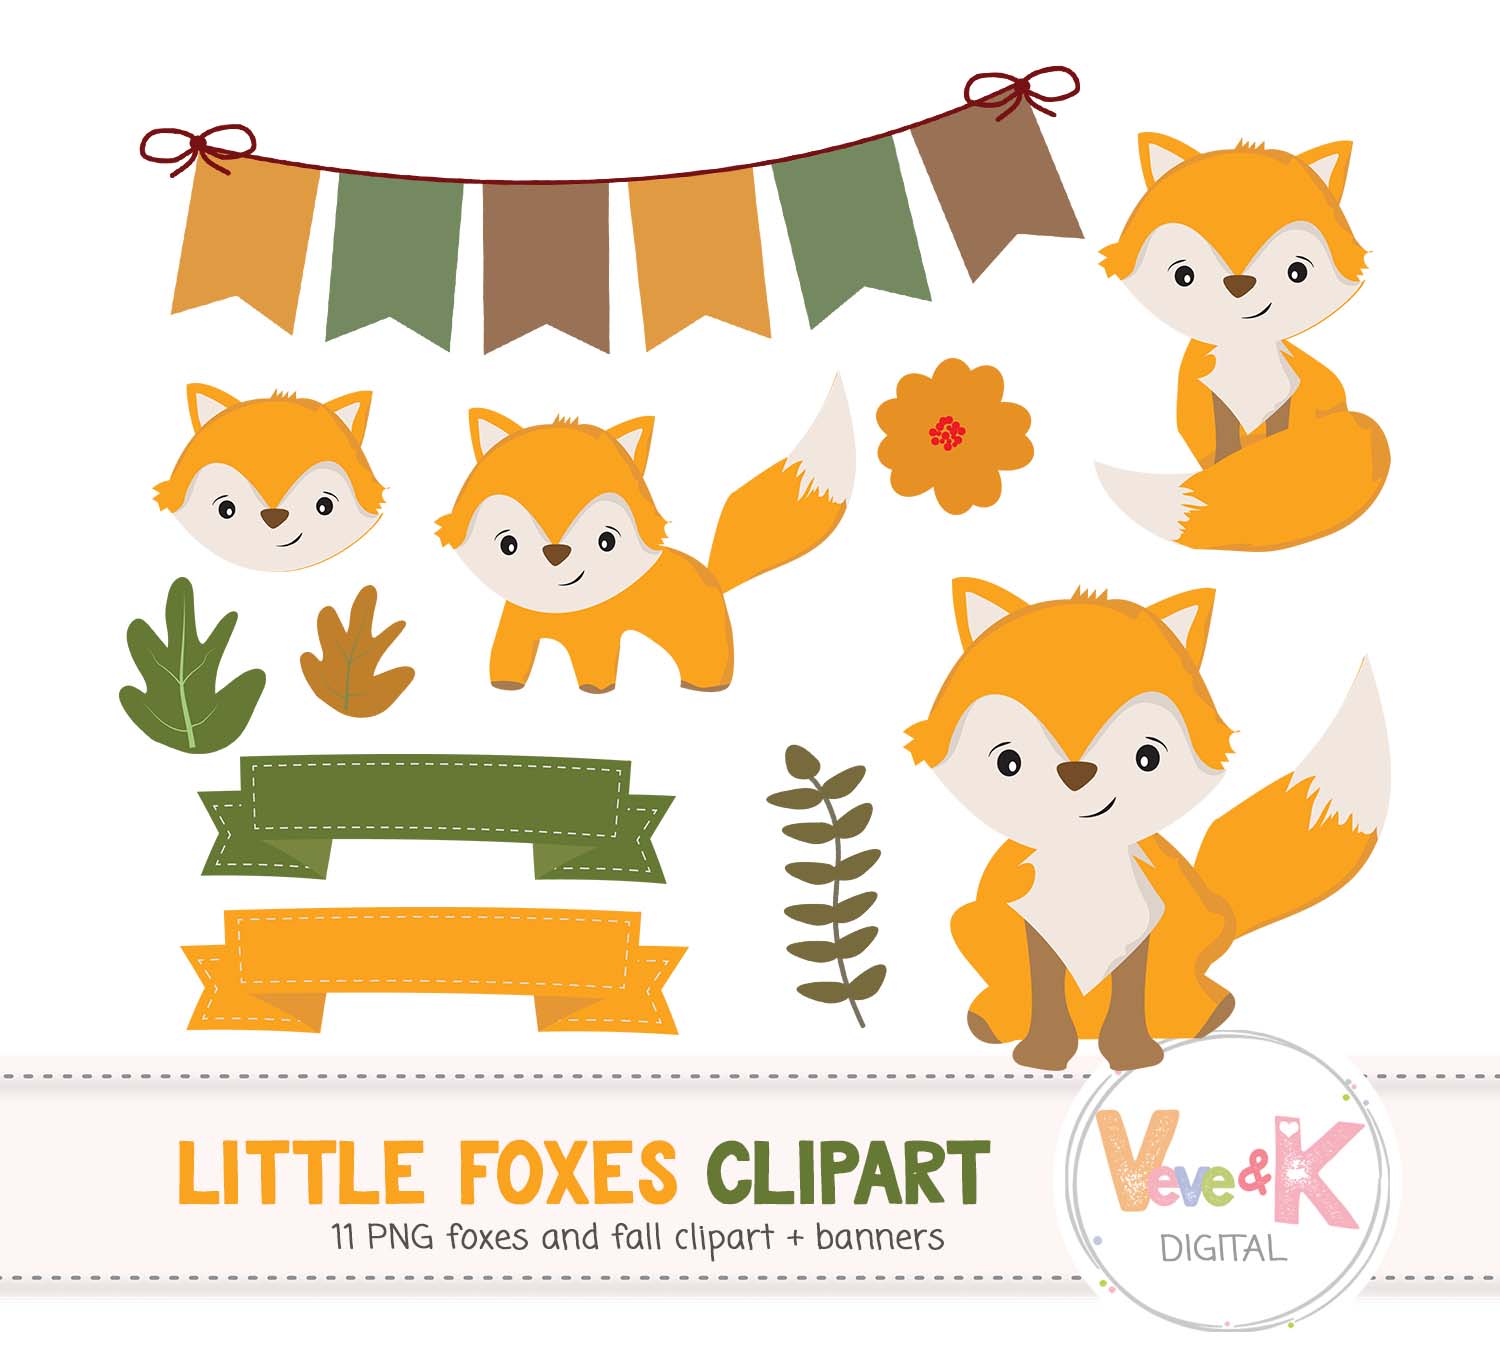 Fox Clip Art, Cute Fox Clipart, Little Foxes Clipart, Forest Creatures,  Forest Critters, Woodland Animals Clipart, Foxes,